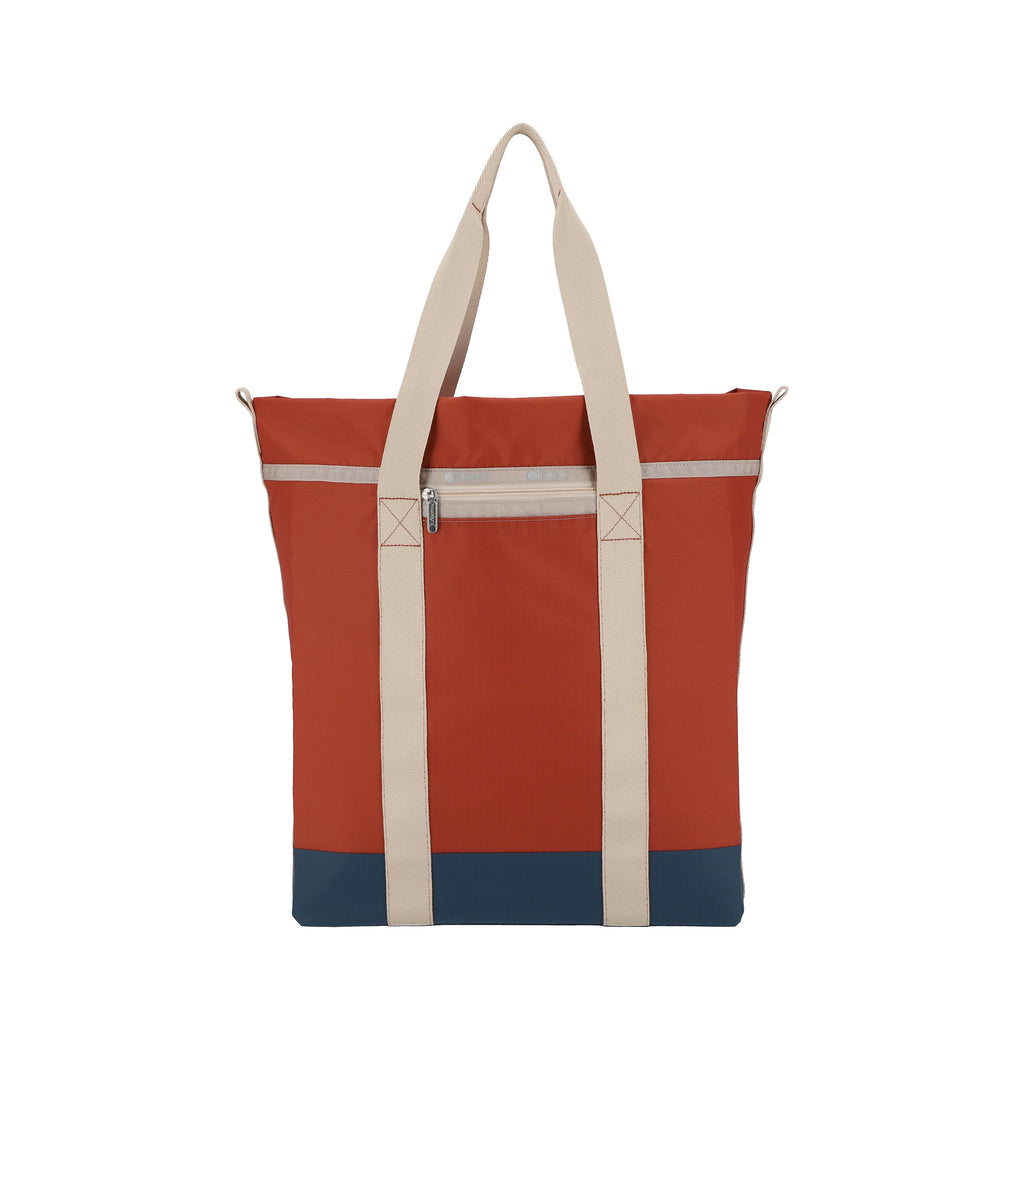 North/South Foldable Tote - 24737021329456